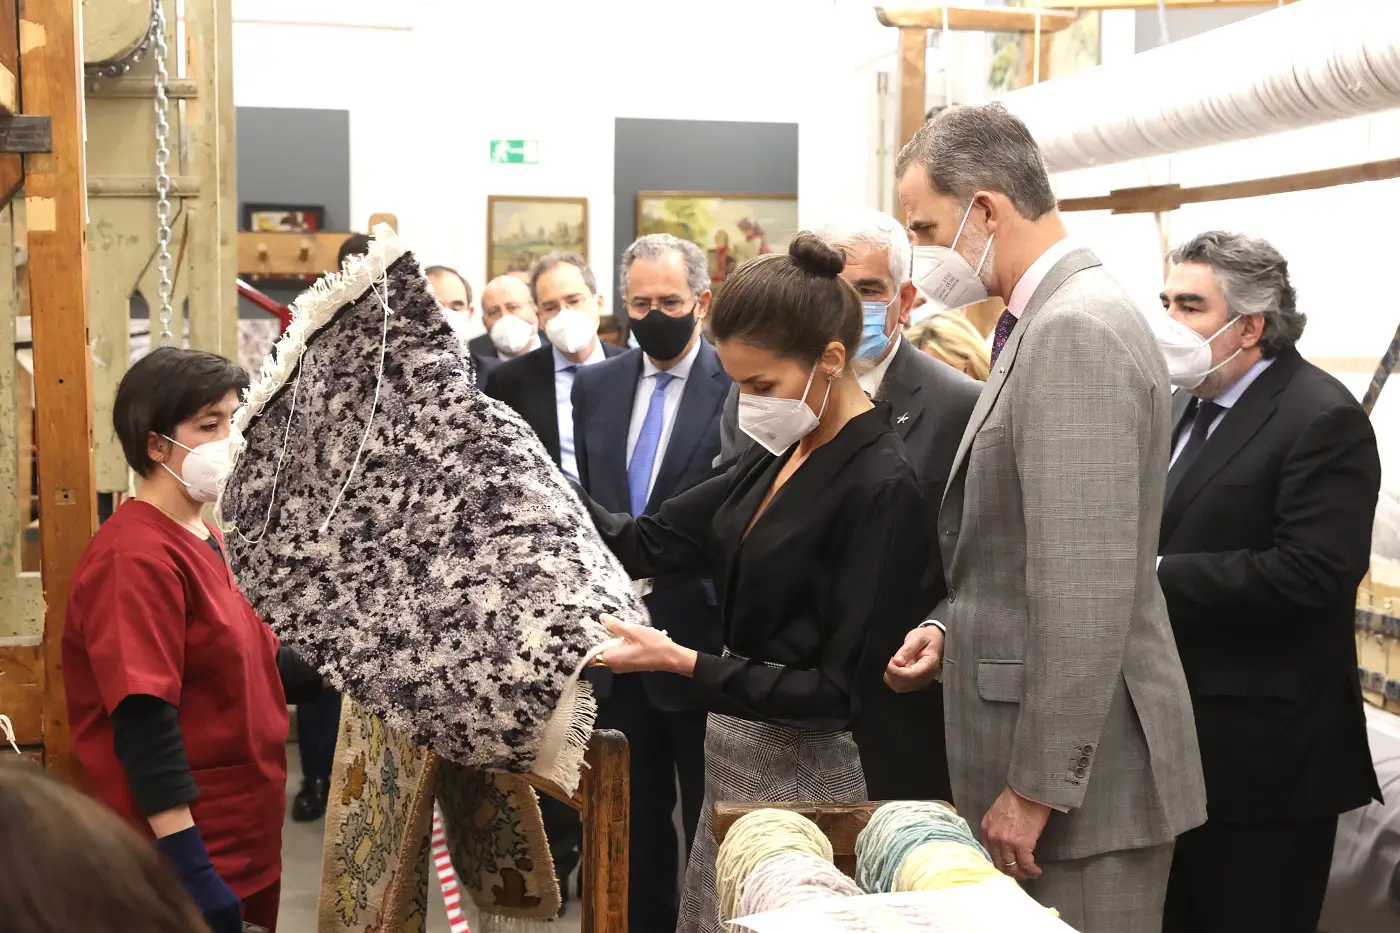 Queen Letizia was very much interested in learning about the products available at the factory